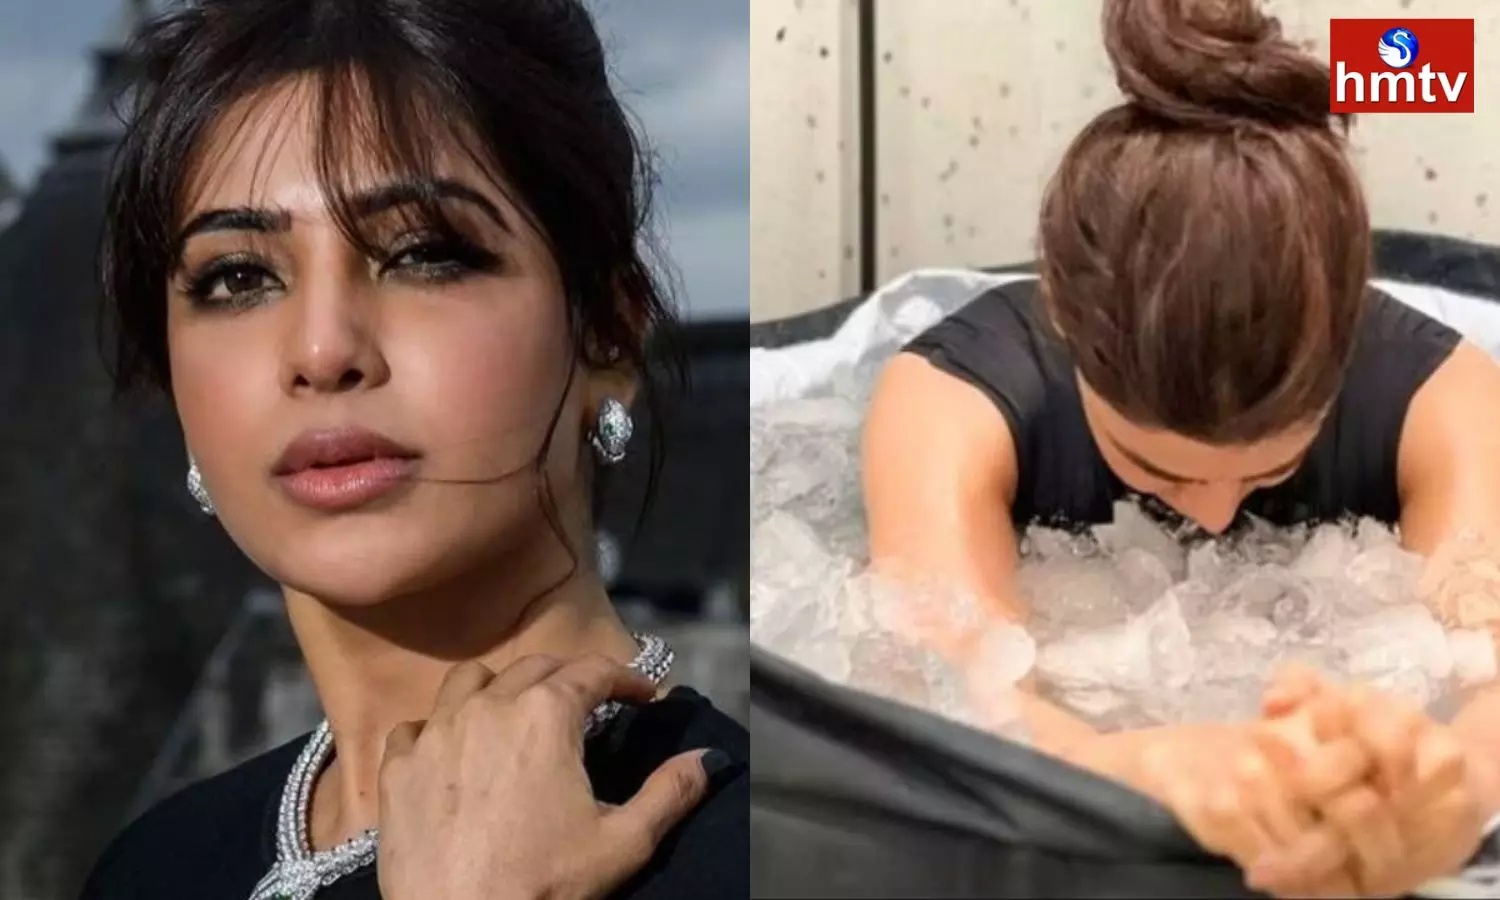 Samantha Shares Ice Bath Photo and Says its Torture Time